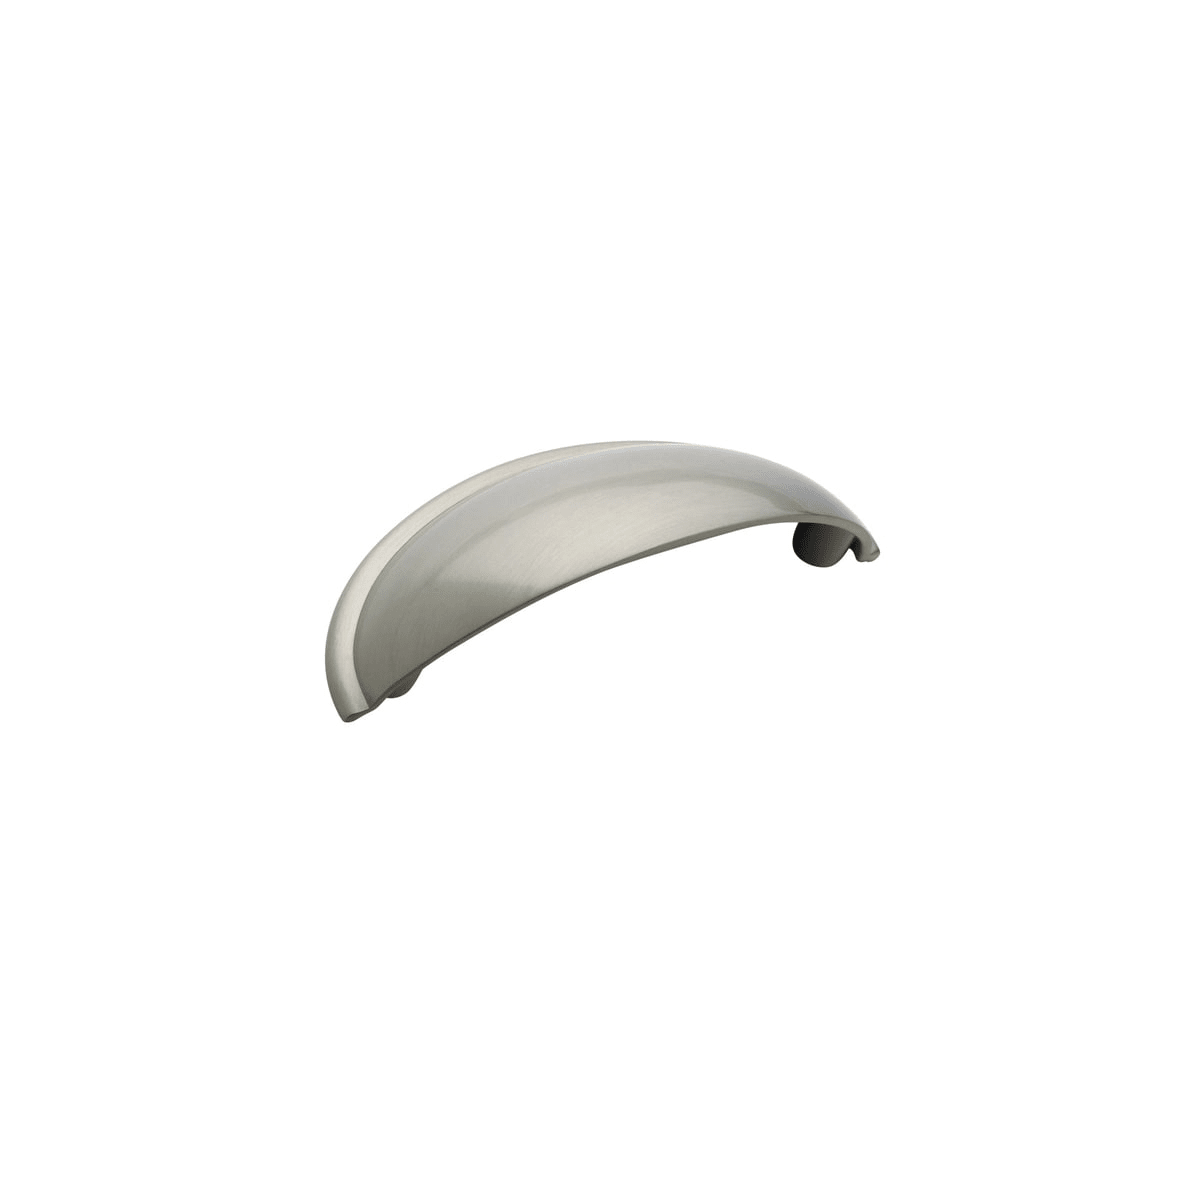 10 Pack BP53019-WI Amerock BP53019WI Wrought Iron 2-1/2 Hole Center Cup Cabinet Handle Pull from the Allison Value Hardware Collection 